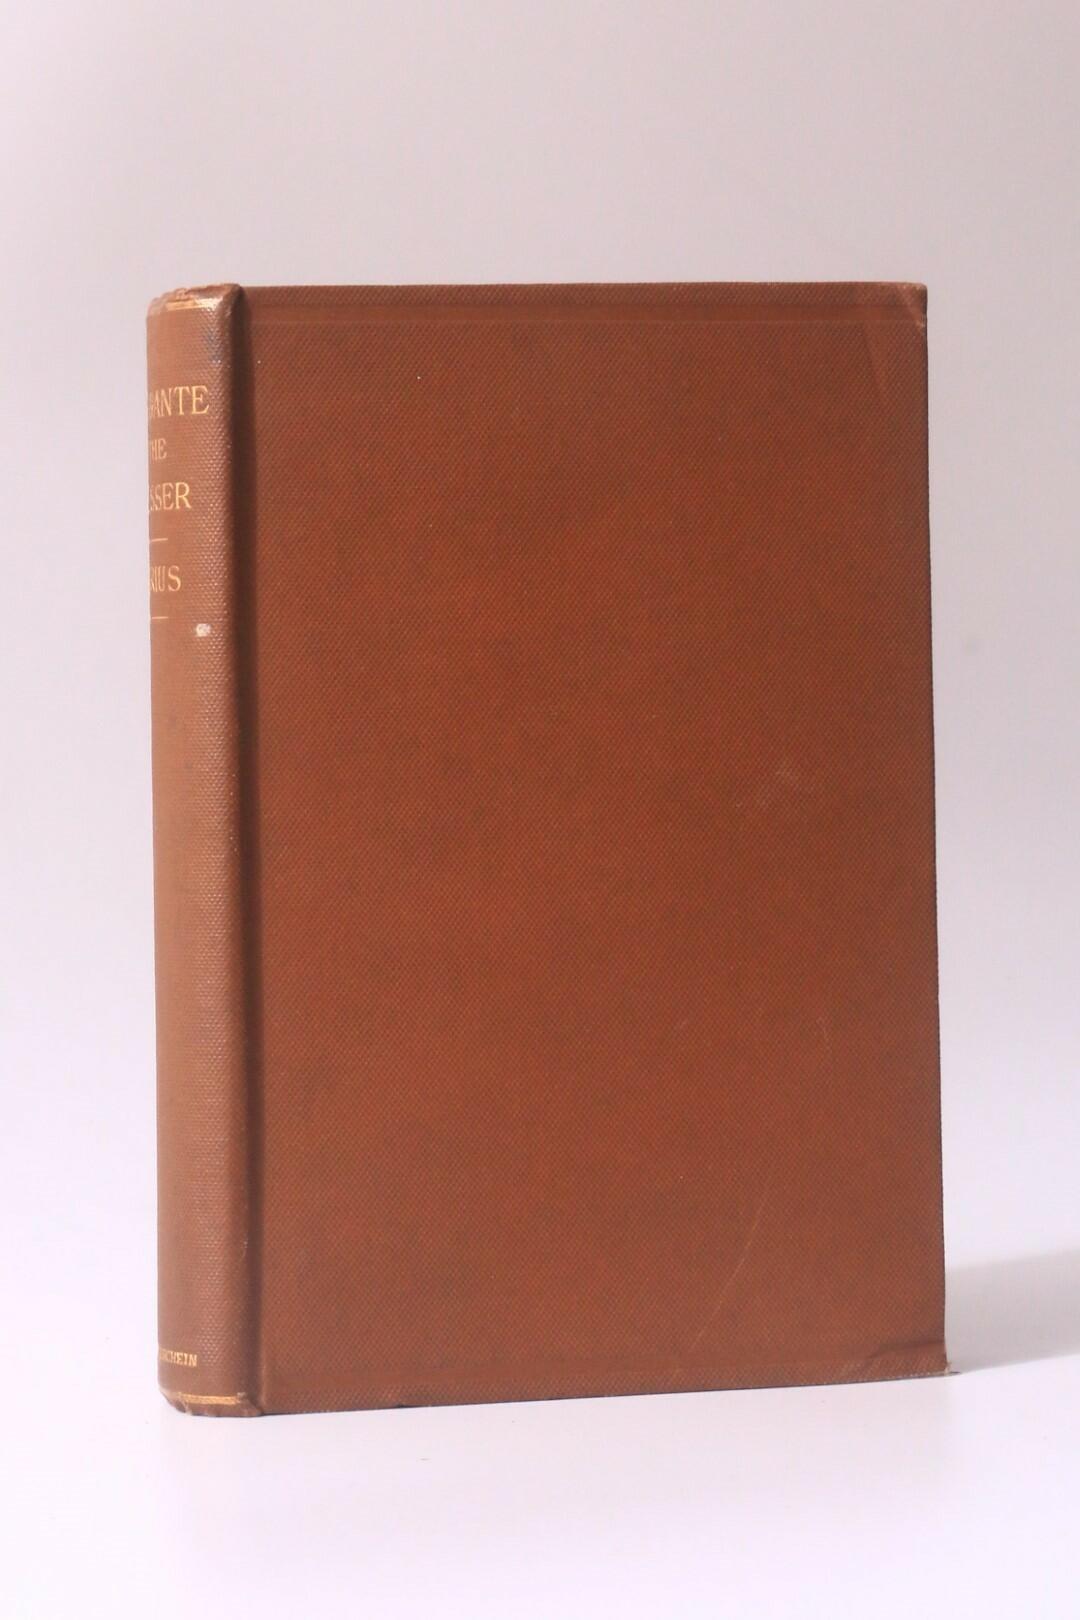 Sirius [Edward Martyn] - Morgante the Lesser: His Notorious Life and Wonderful Deeds - Swan Sonnenschein and Co , 1890, Signed First Edition.